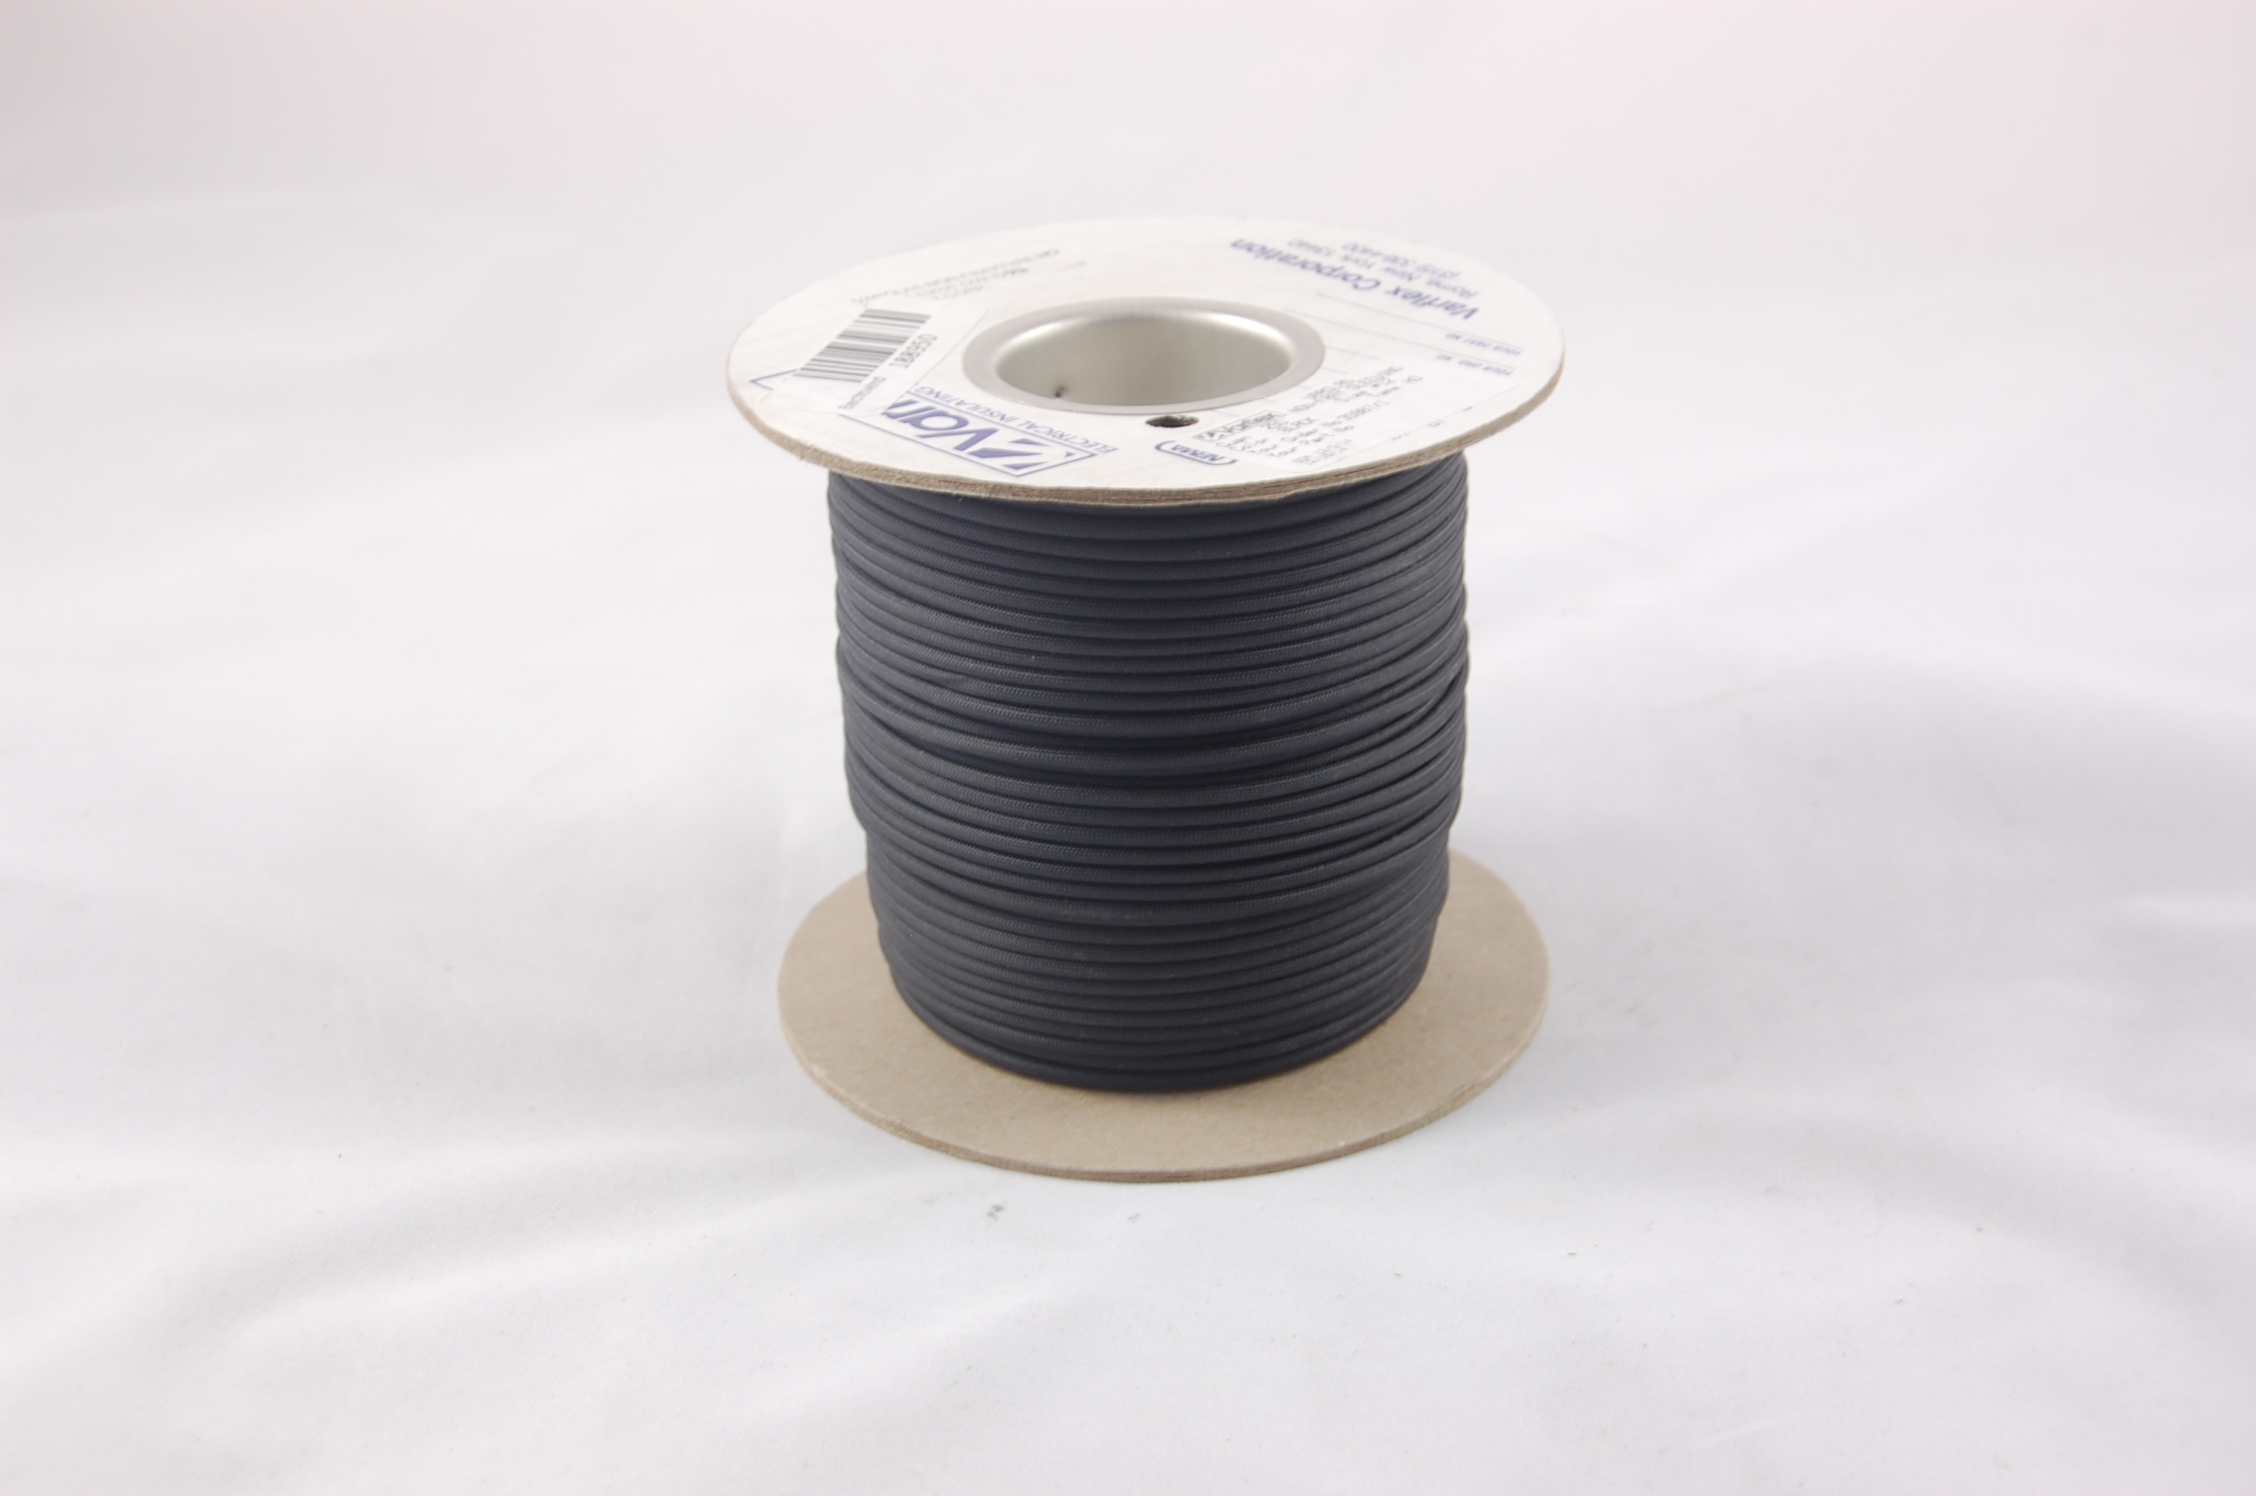 #18 AWG Varglas Type HO Heat-Cleaned and Treated High Temperature Non-Fray Flexible Fiberglass Sleeving , black, 500 FT per spool